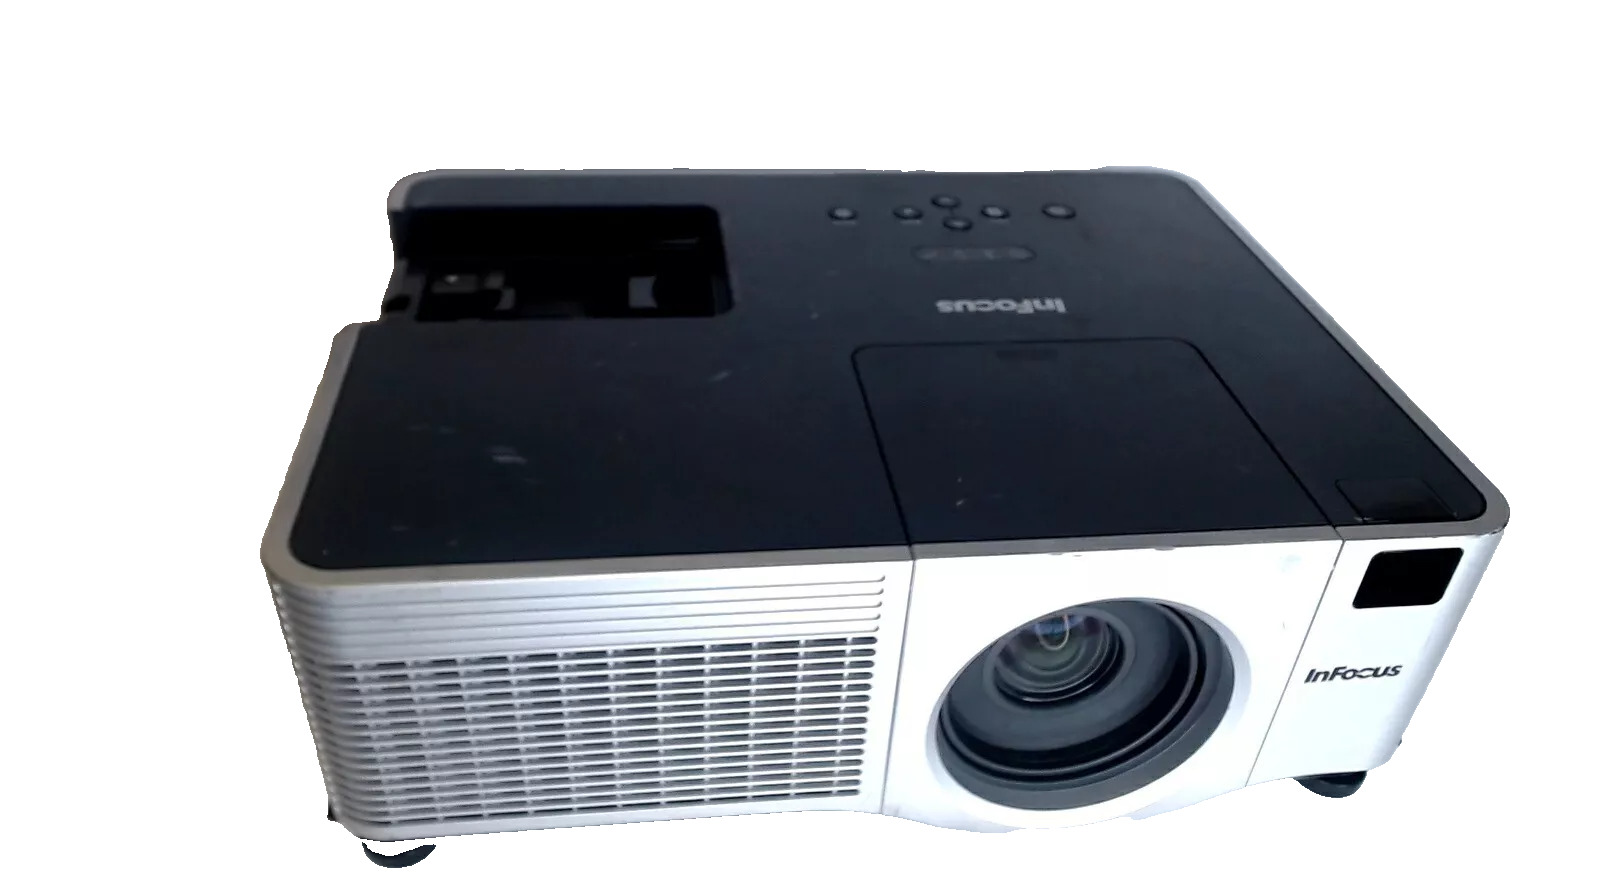 InFocus W400 Projector Used 3866 Lamp Hours